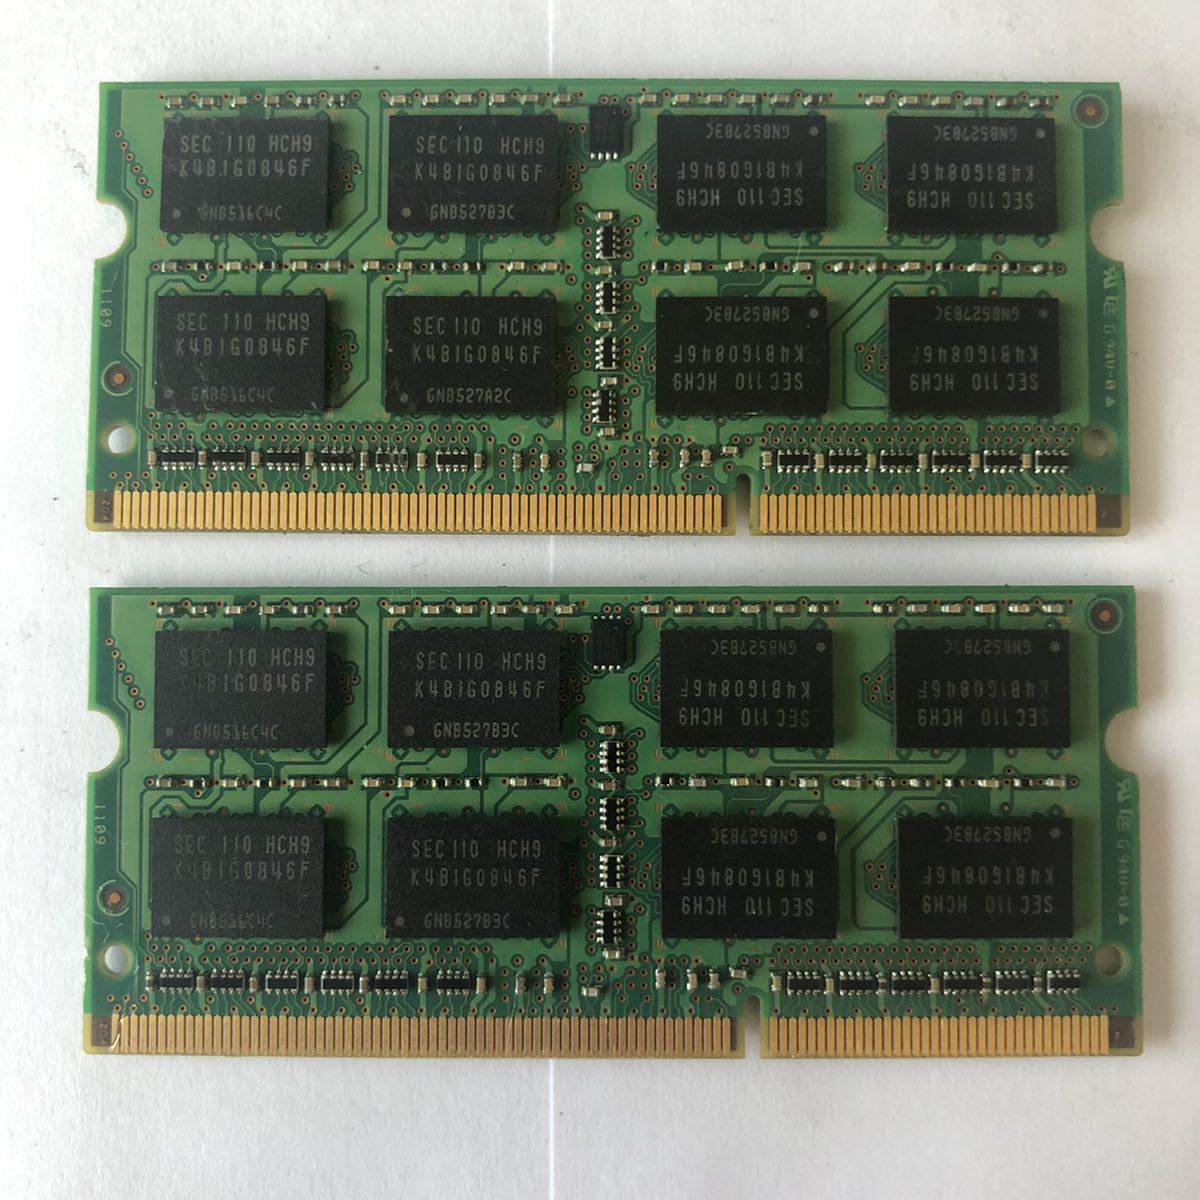  secondhand goods SAMSUNG 2GB 2Rx8 PC3-10600S-09-10-F2 memory (2 point set )